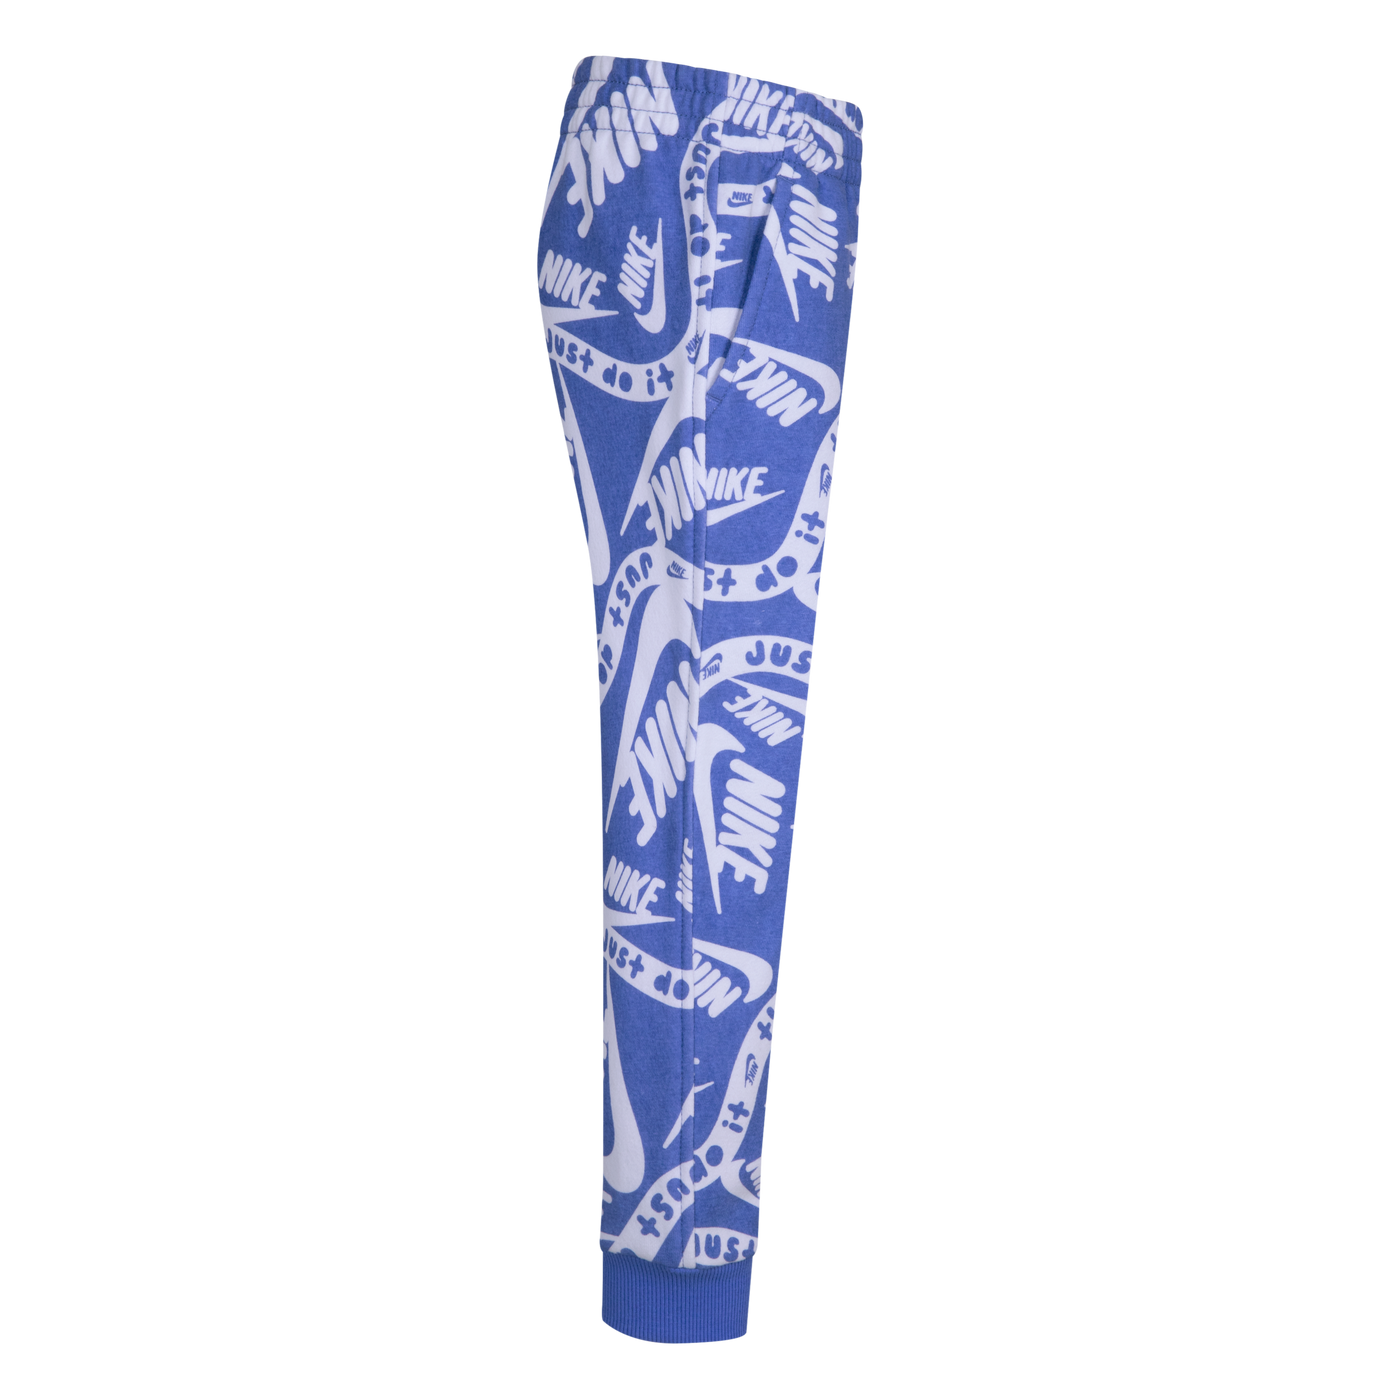 Nike Blue All-Over Print Joggers